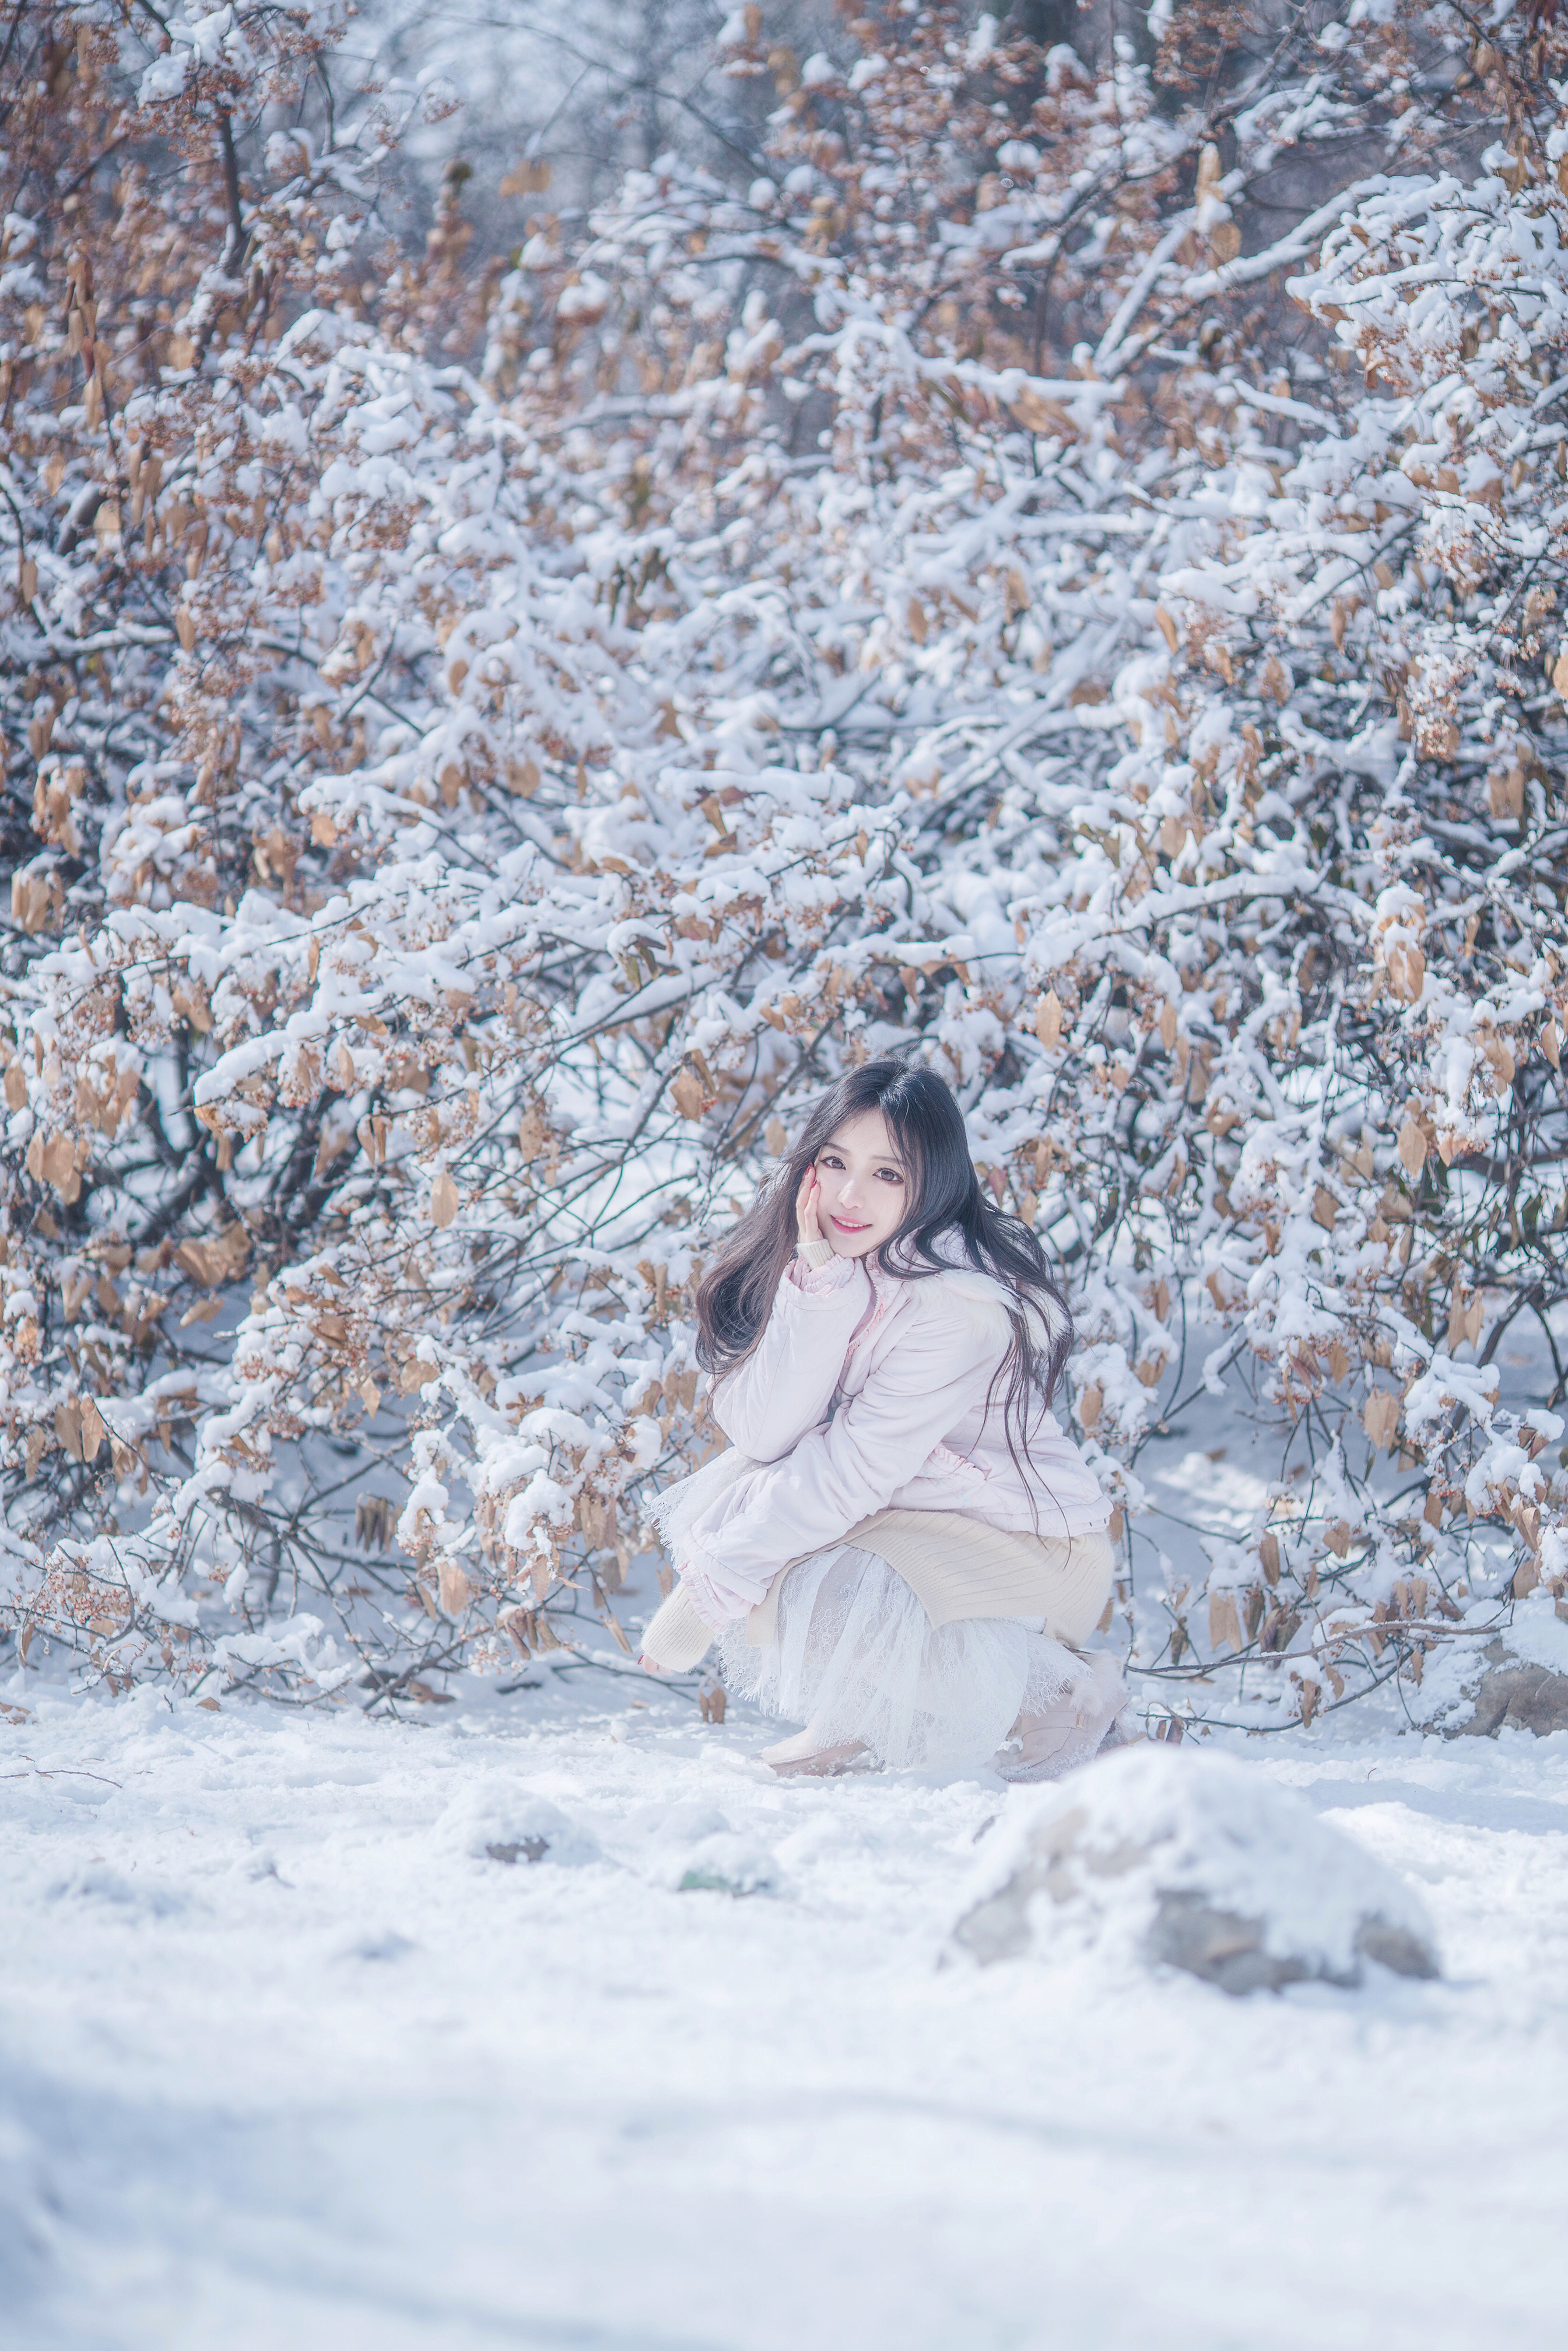 People 2689x4032 snow Asian women model cold outdoors women outdoors looking at viewer brunette long hair smiling red nails painted nails plants red lipstick